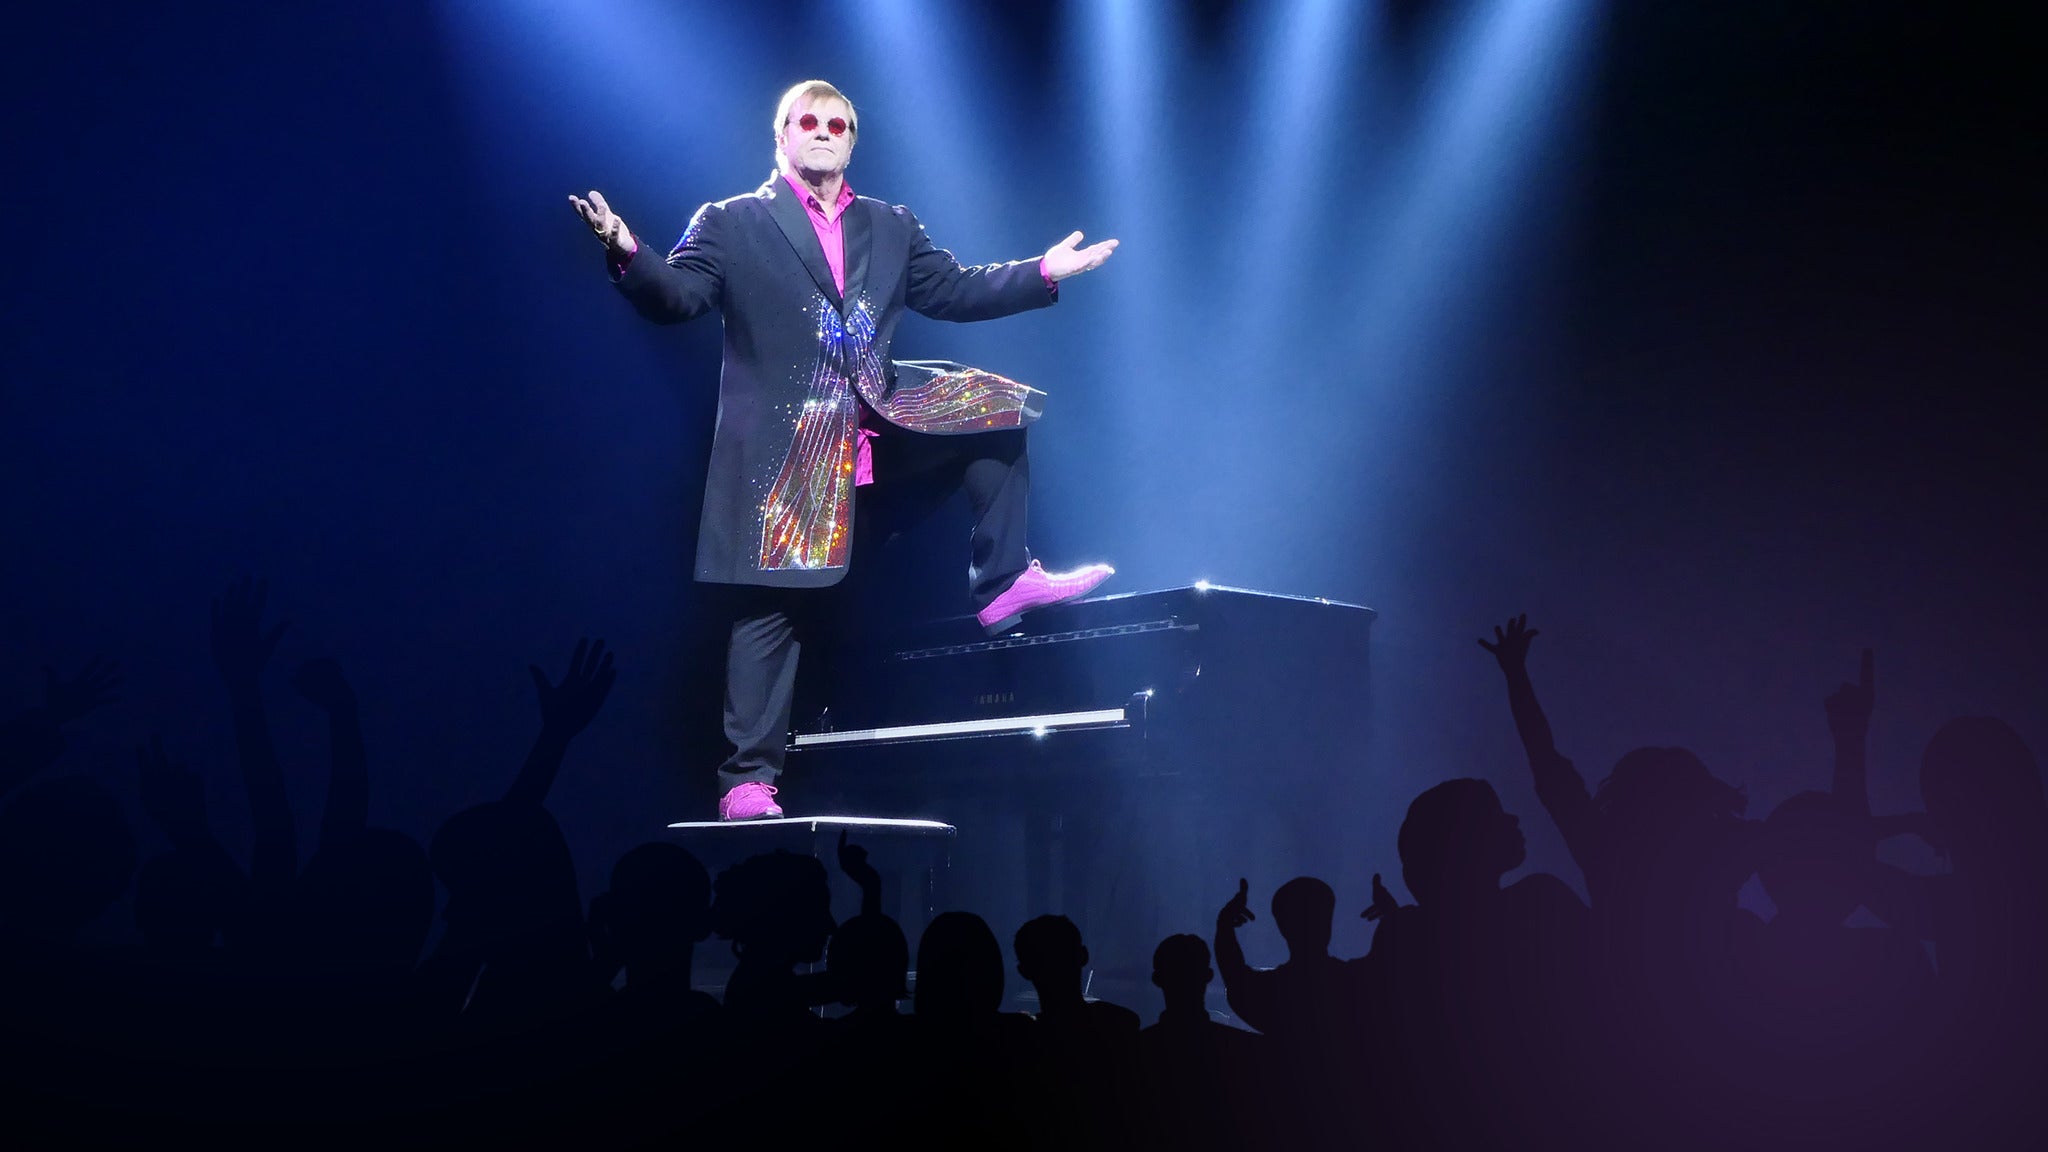 Image used with permission from Ticketmaster | Rocketman - Live in Concert tickets